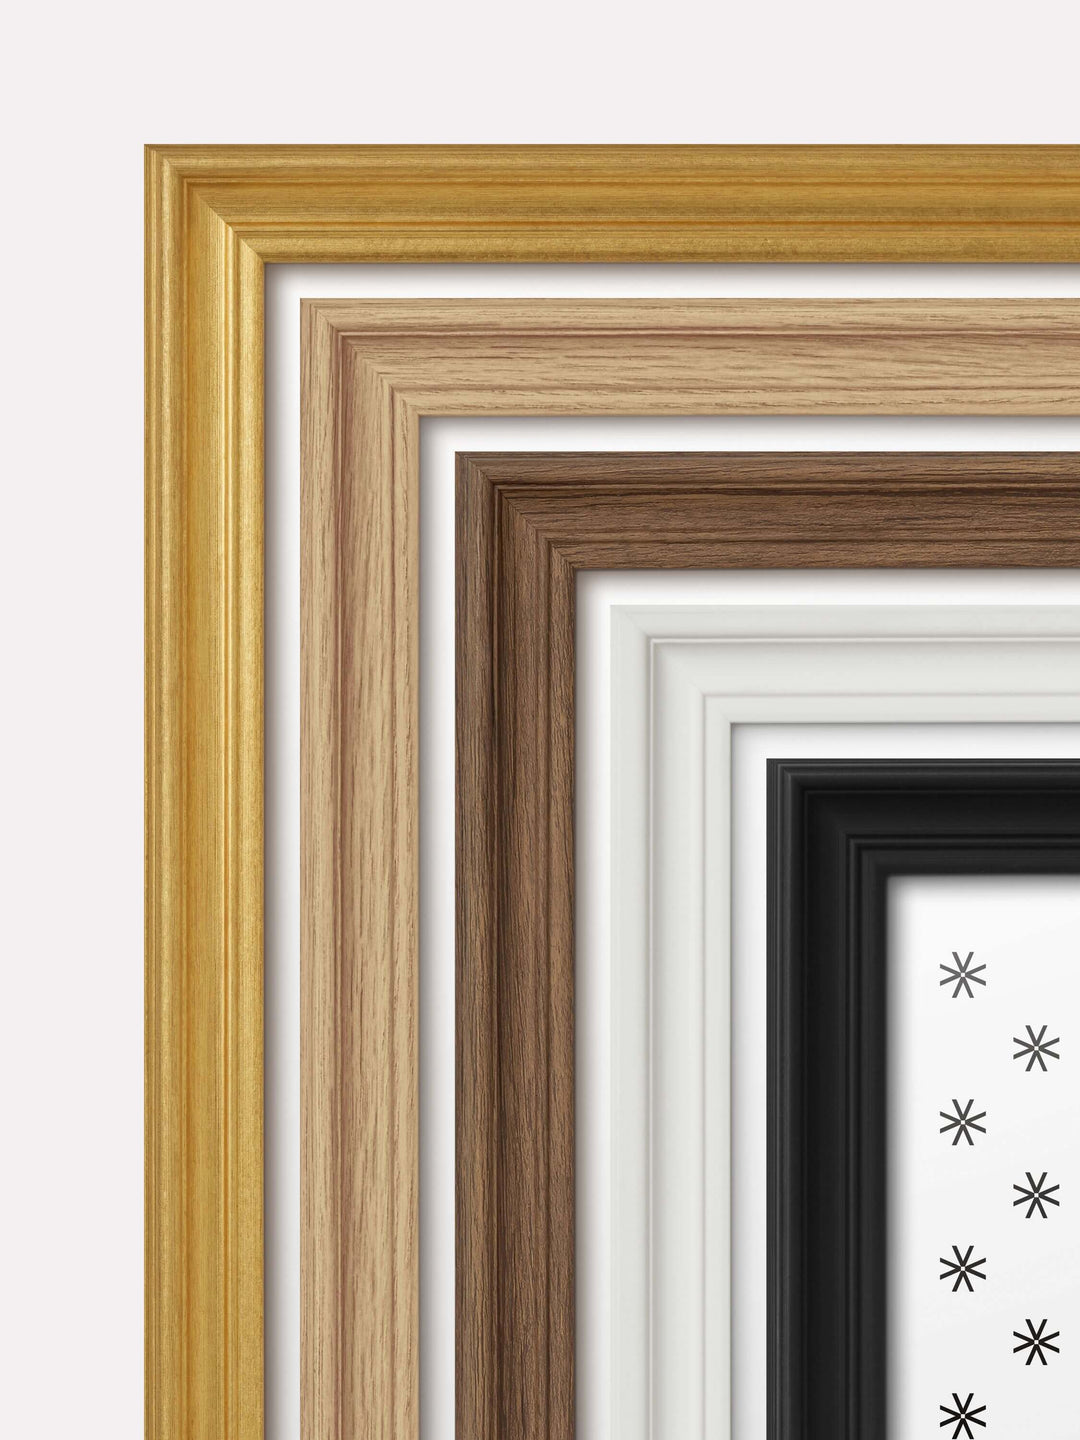 Decorative frames in multiple colors